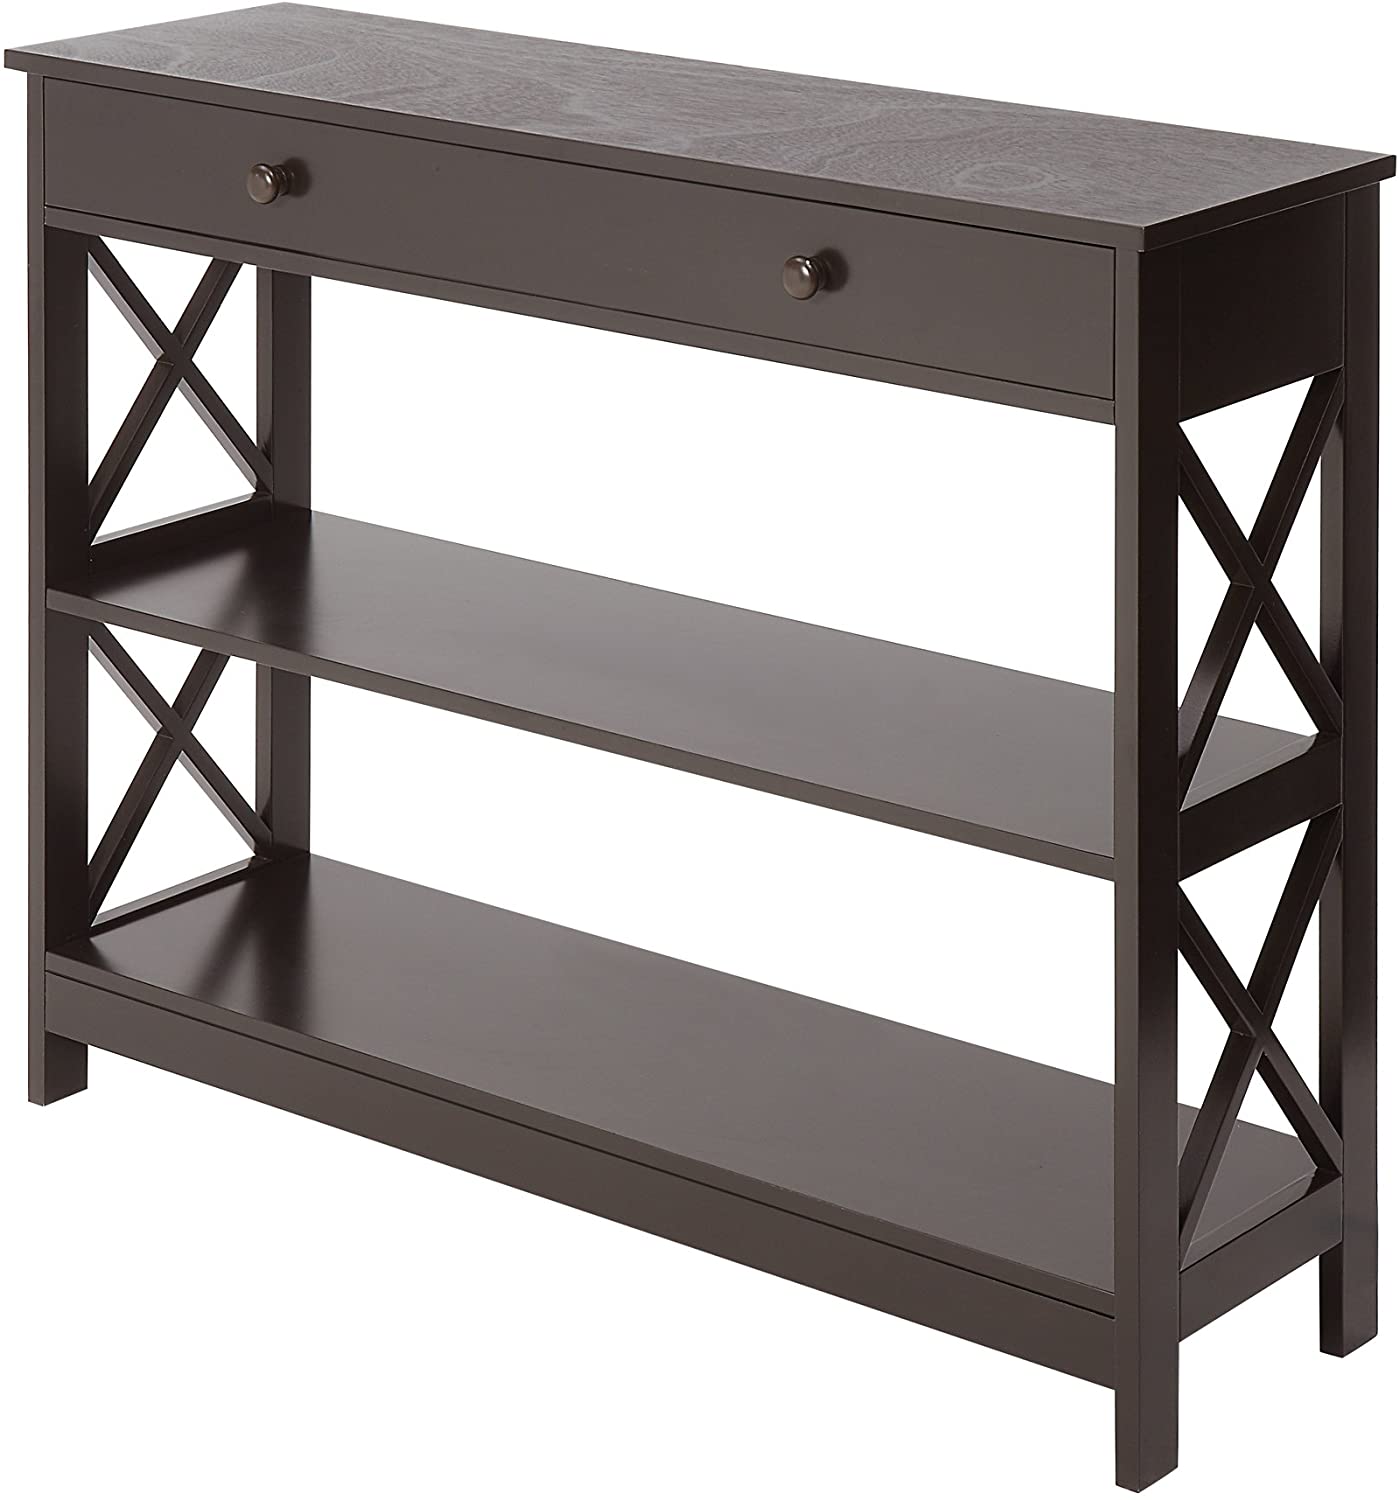 Convenience Concepts Oxford Pull-Out Drawer Console Table For Entryway